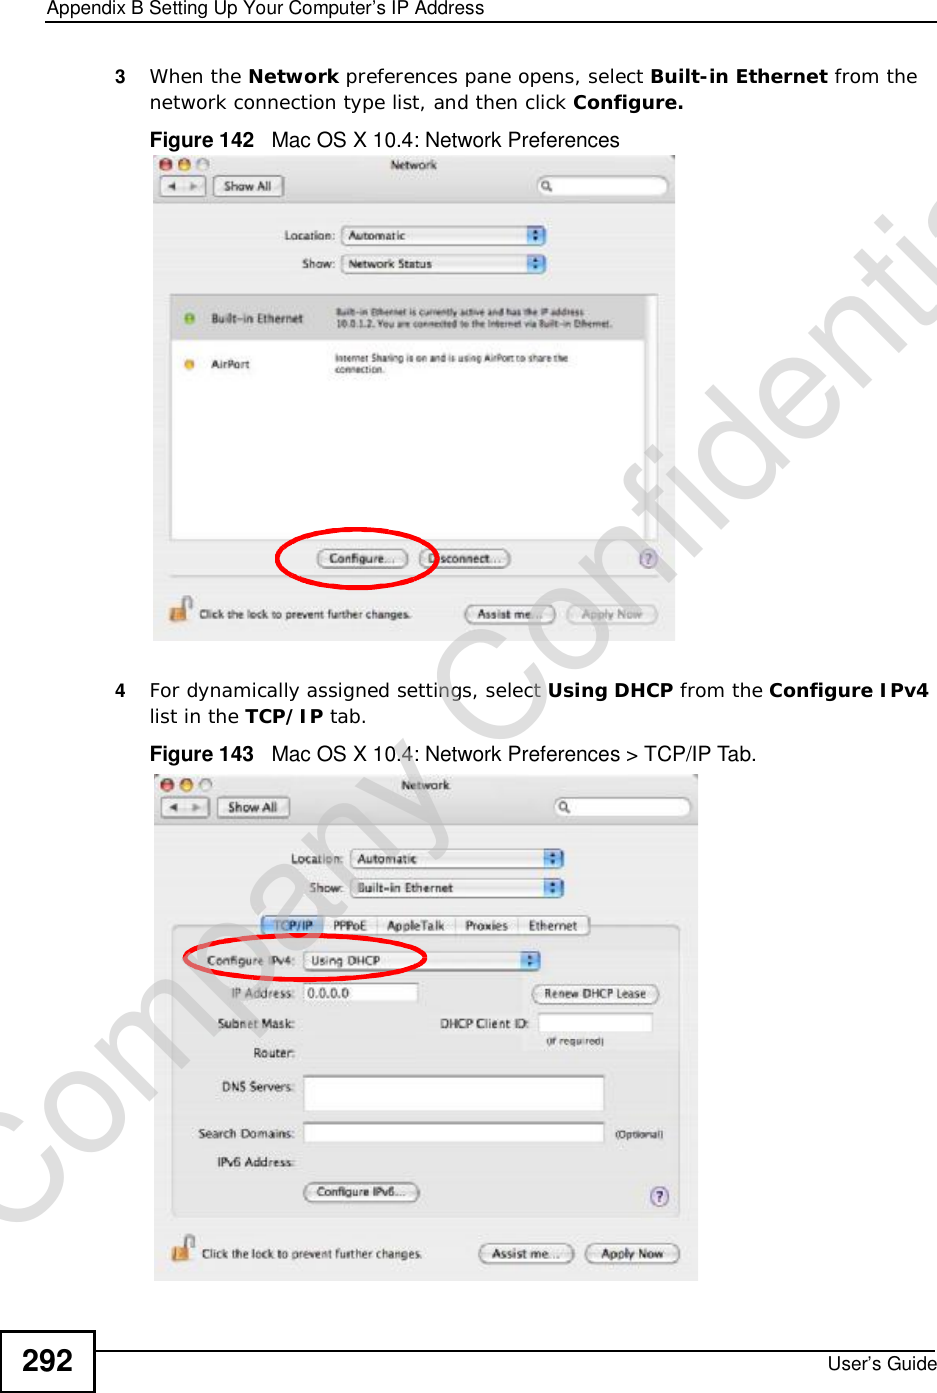 Appendix BSetting Up Your Computer’s IP AddressUser’s Guide2923When the Network preferences pane opens, select Built-in Ethernet from the network connection type list, and then click Configure.Figure 142   Mac OS X 10.4: Network Preferences4For dynamically assigned settings, select Using DHCP from the Configure IPv4list in the TCP/IP tab.Figure 143   Mac OS X 10.4: Network Preferences &gt; TCP/IP Tab.Company Confidential